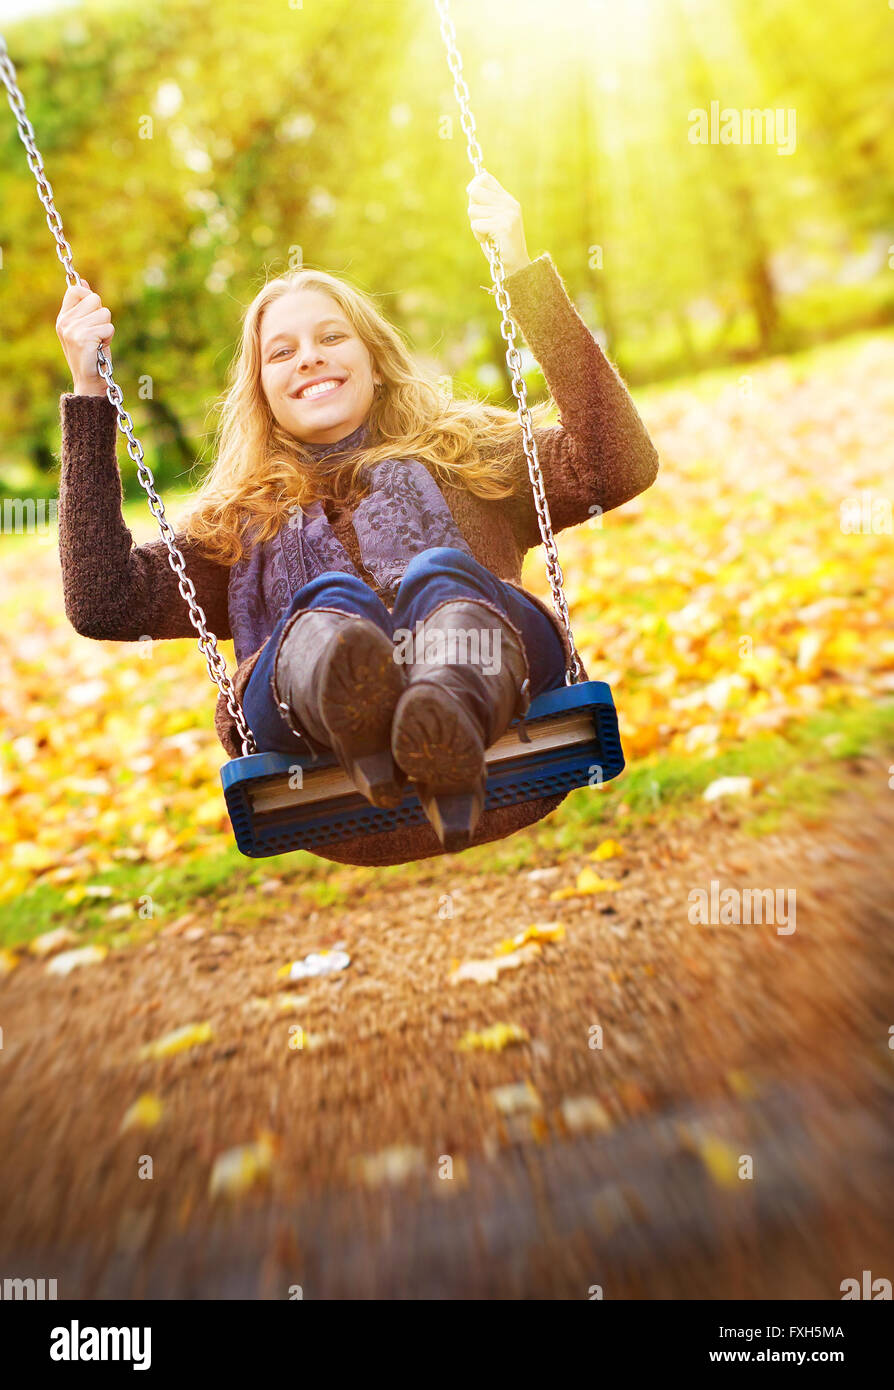 Happy young woman on a swing in the sun Stock Photo